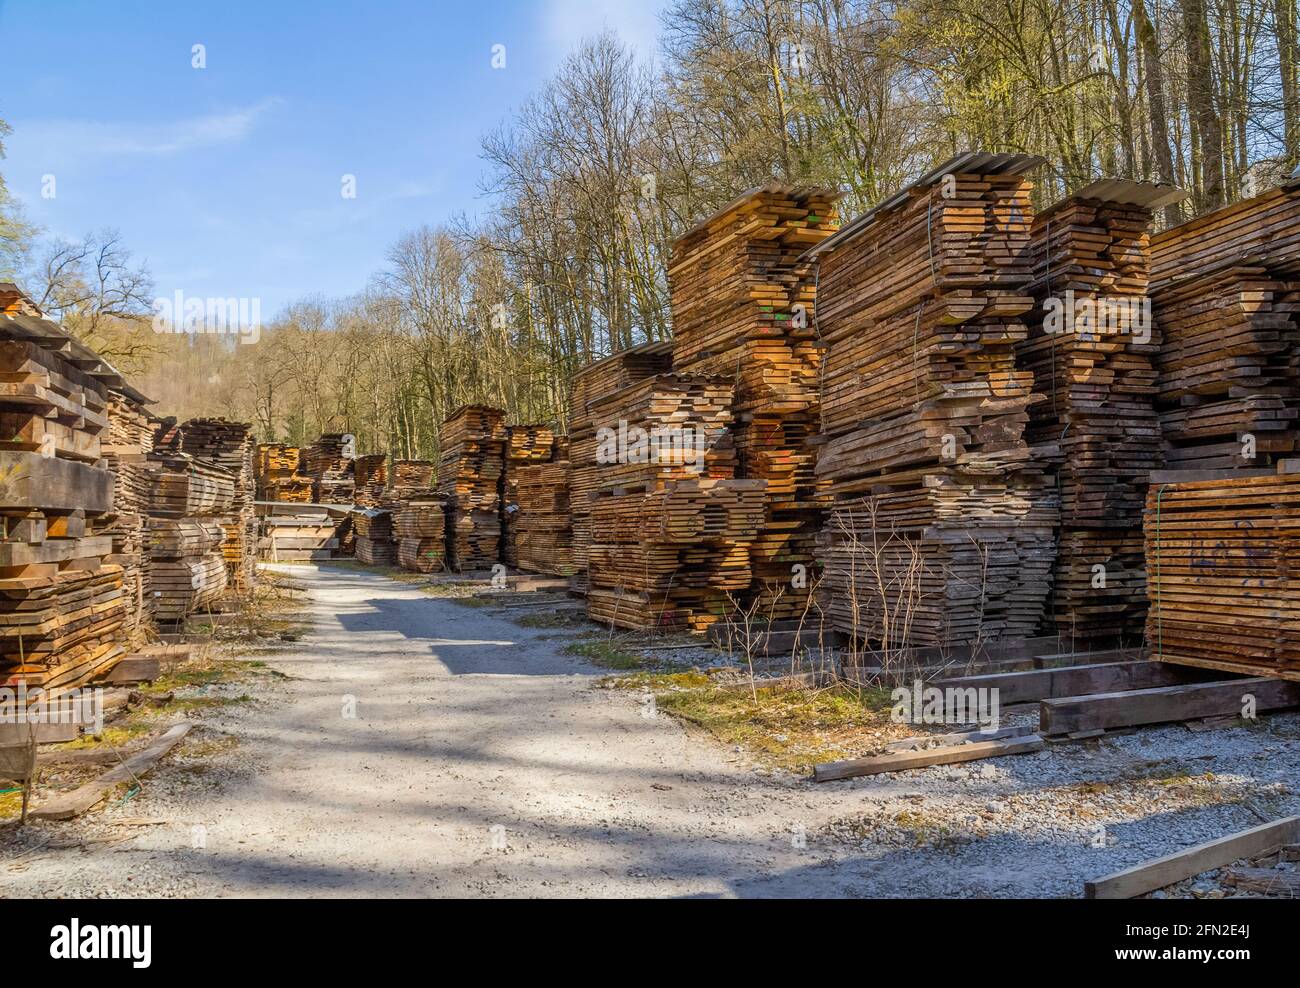 Lots of stacked wooden boards on a lumber yard in sunny ambiance Stock Photo